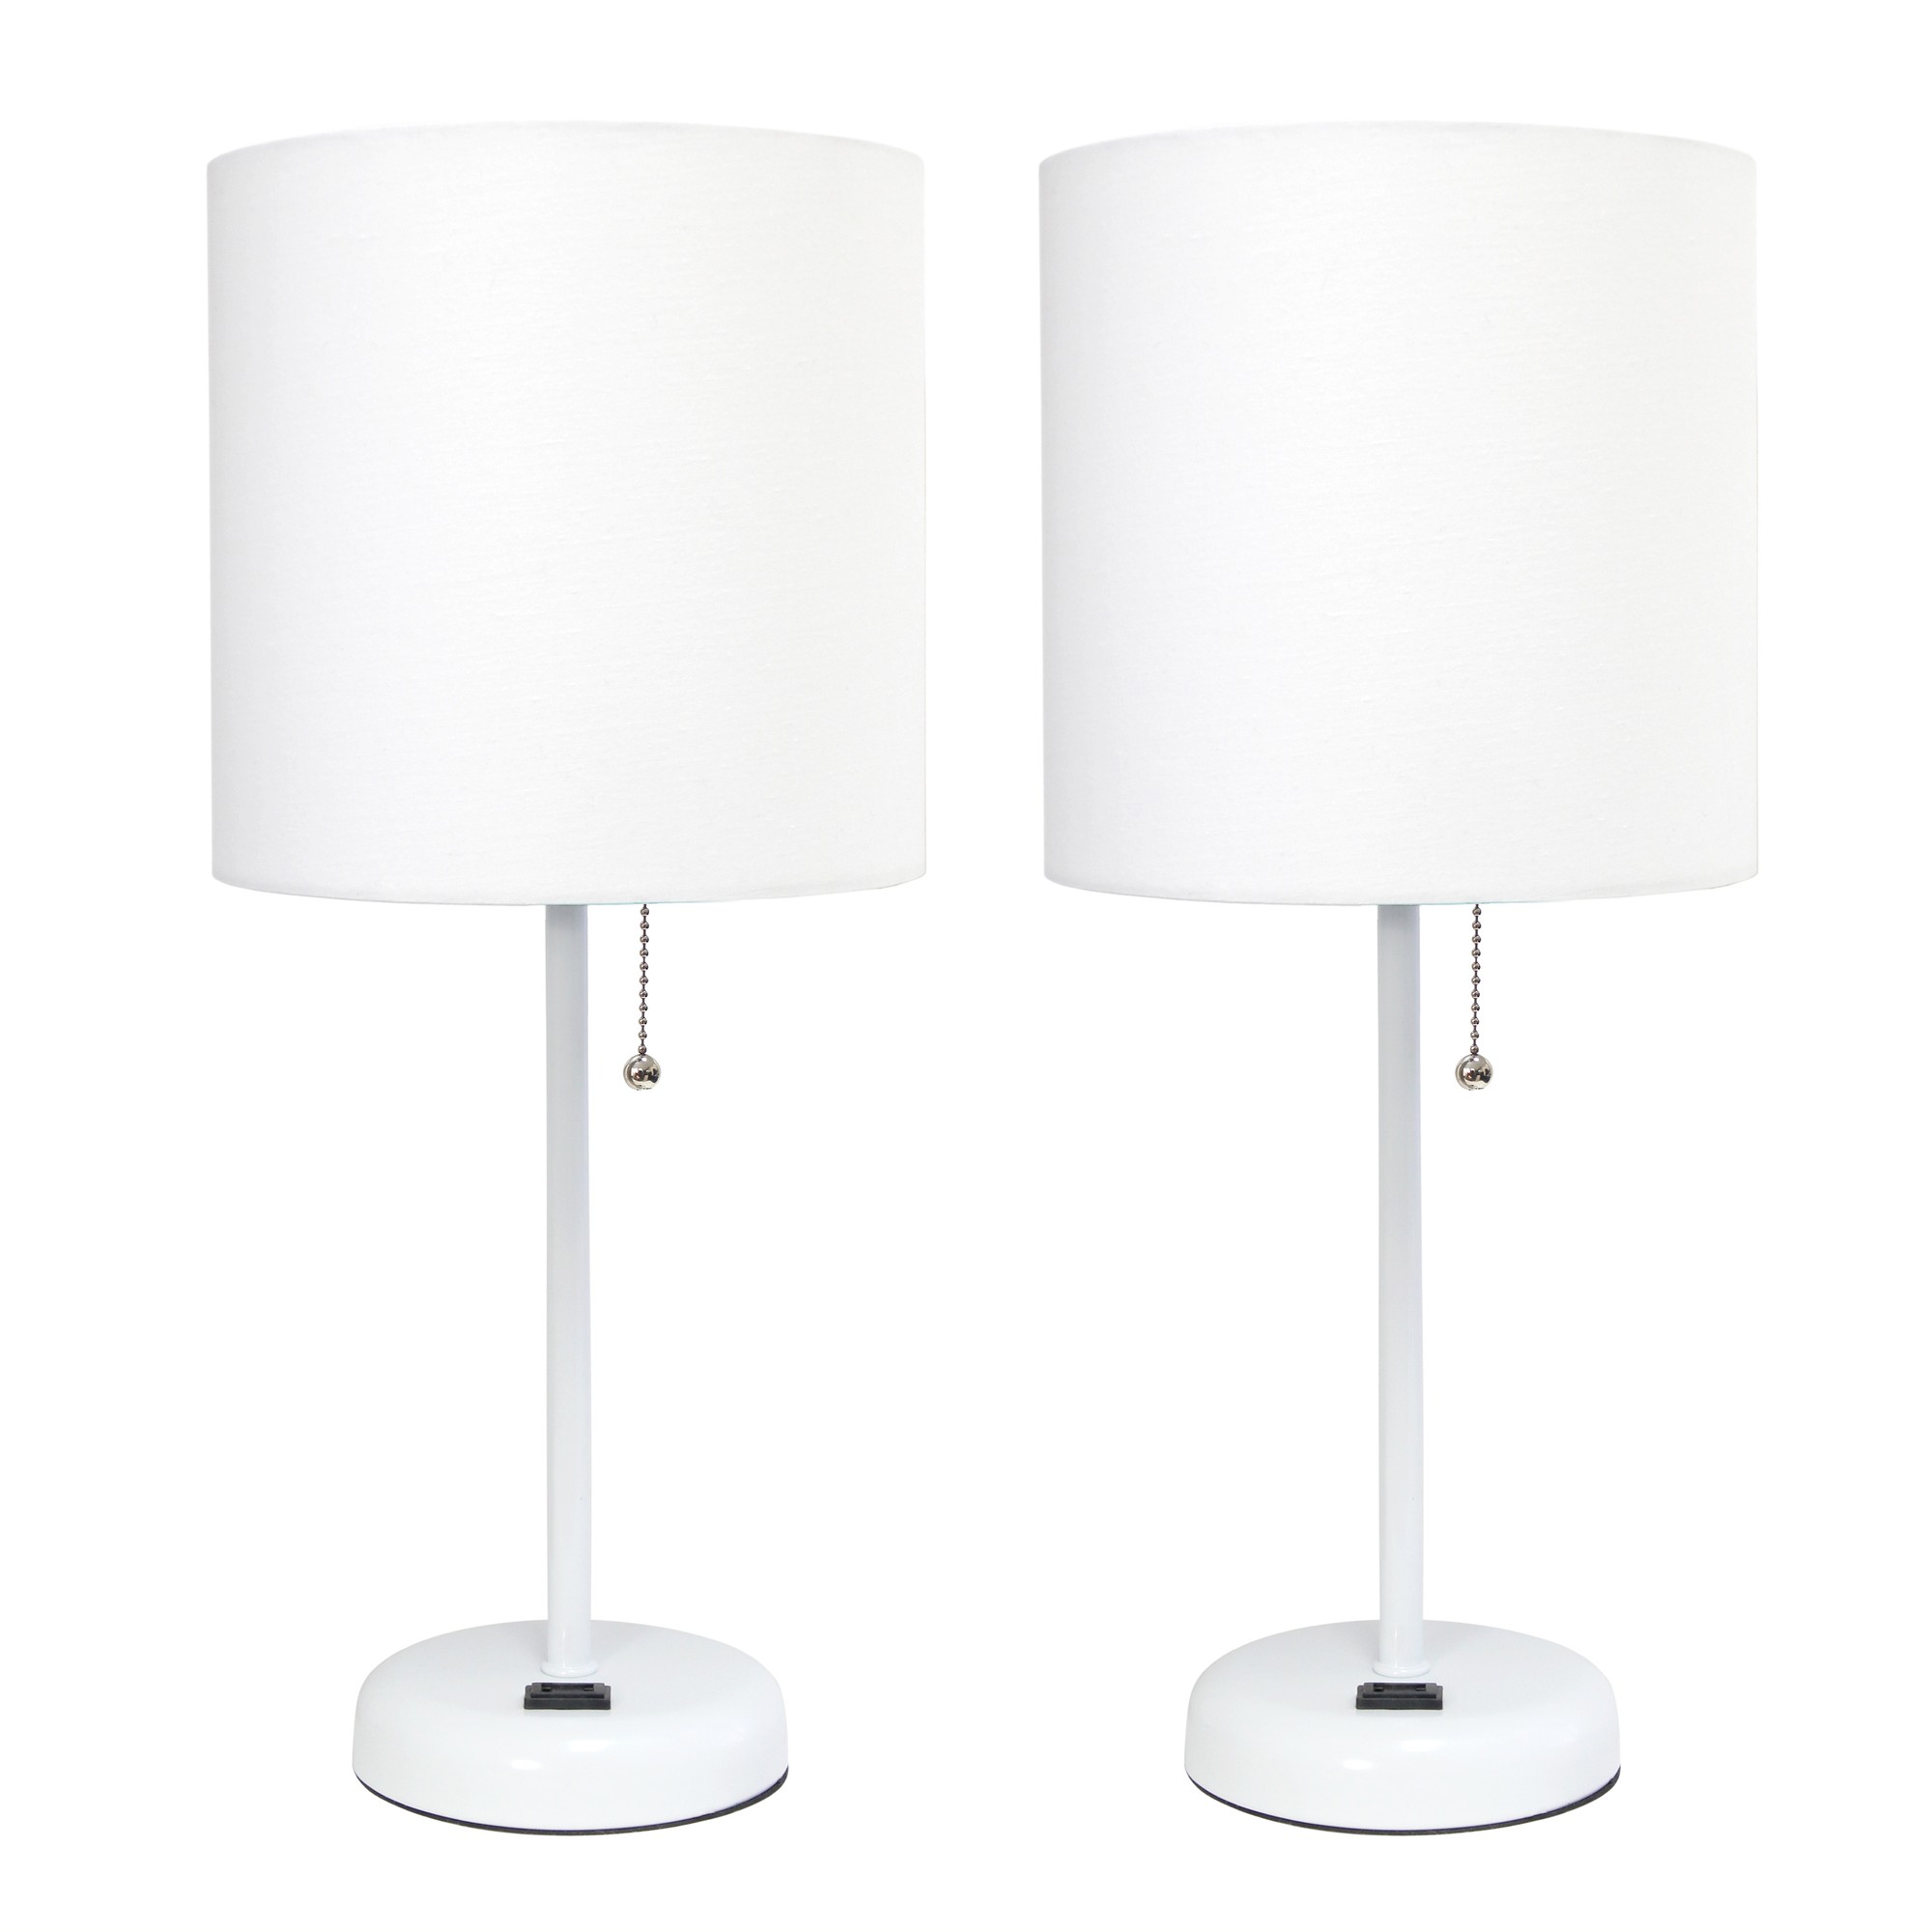 Simple Designs White Stick Lamp with Charging Outlet and Fabric Shade 2 Pack Set, White